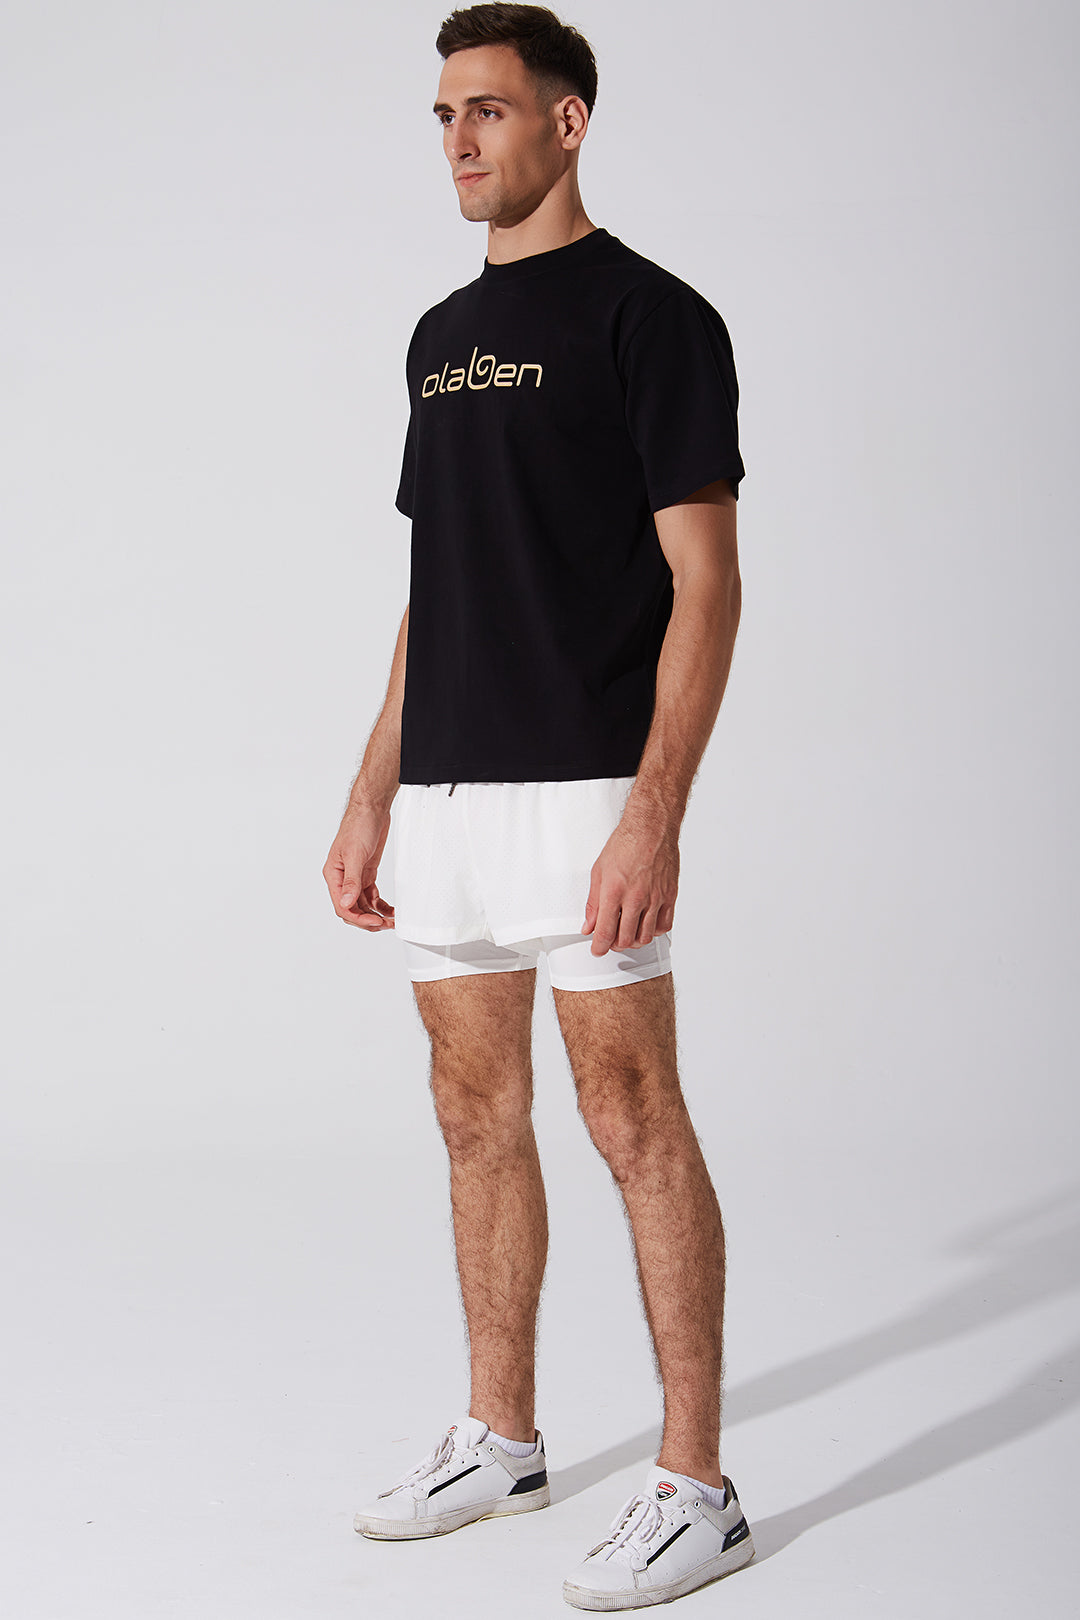 Unisex black short sleeve tee by Olaben, perfect for limited edition fashion enthusiasts.